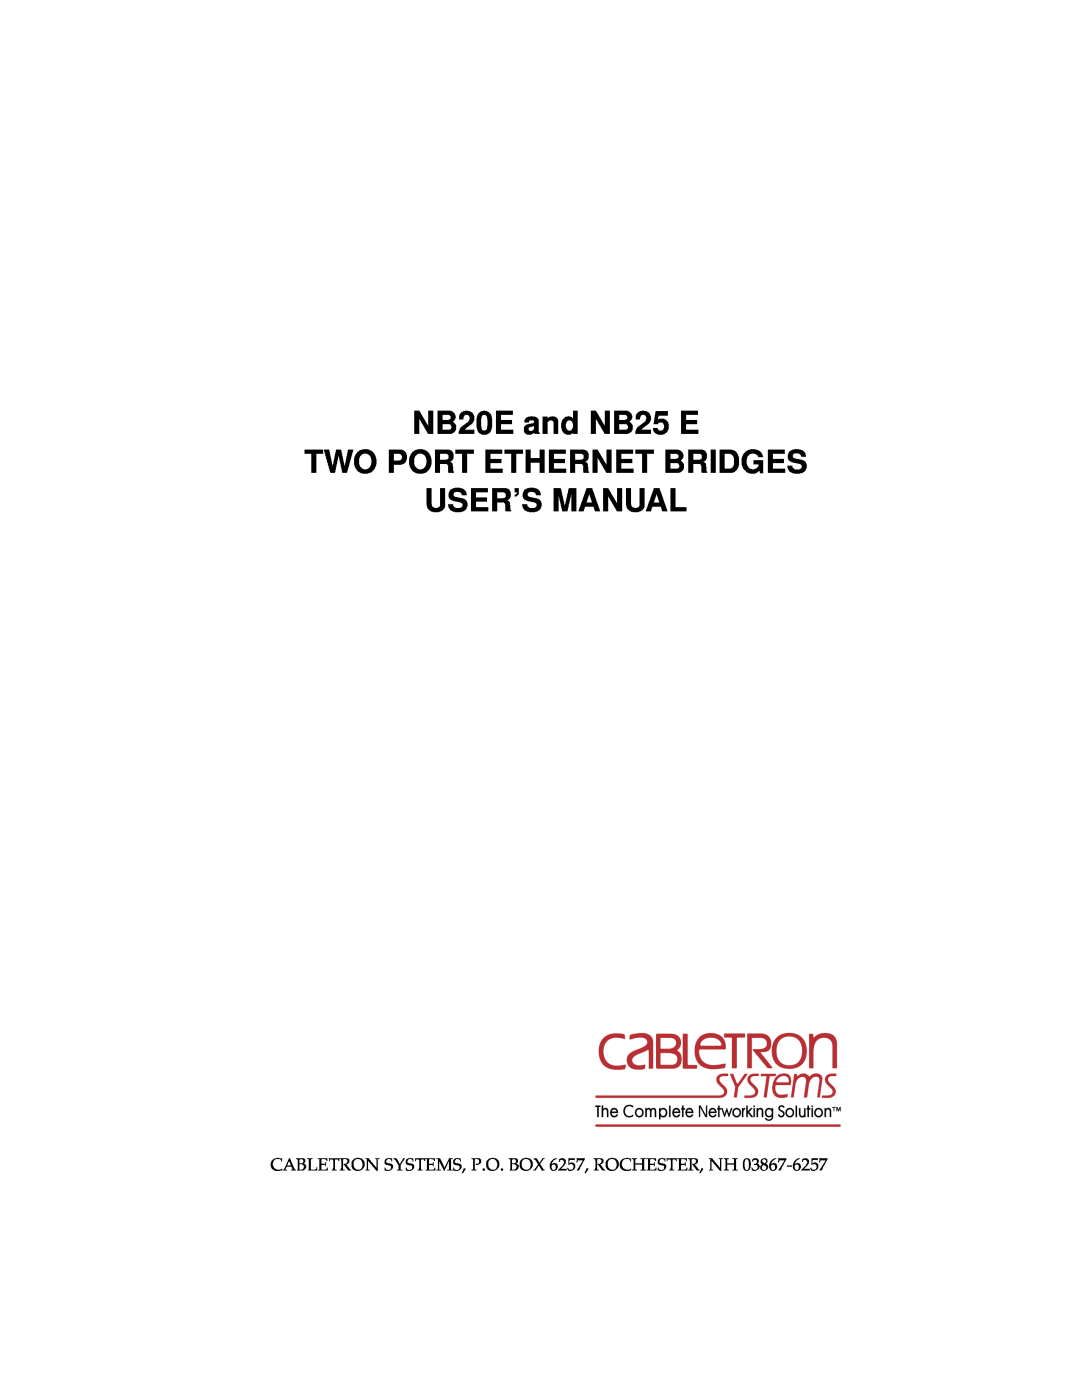 Cabletron Systems user manual NB20E and NB25 E TWO PORT ETHERNET BRIDGES USER’S MANUAL 